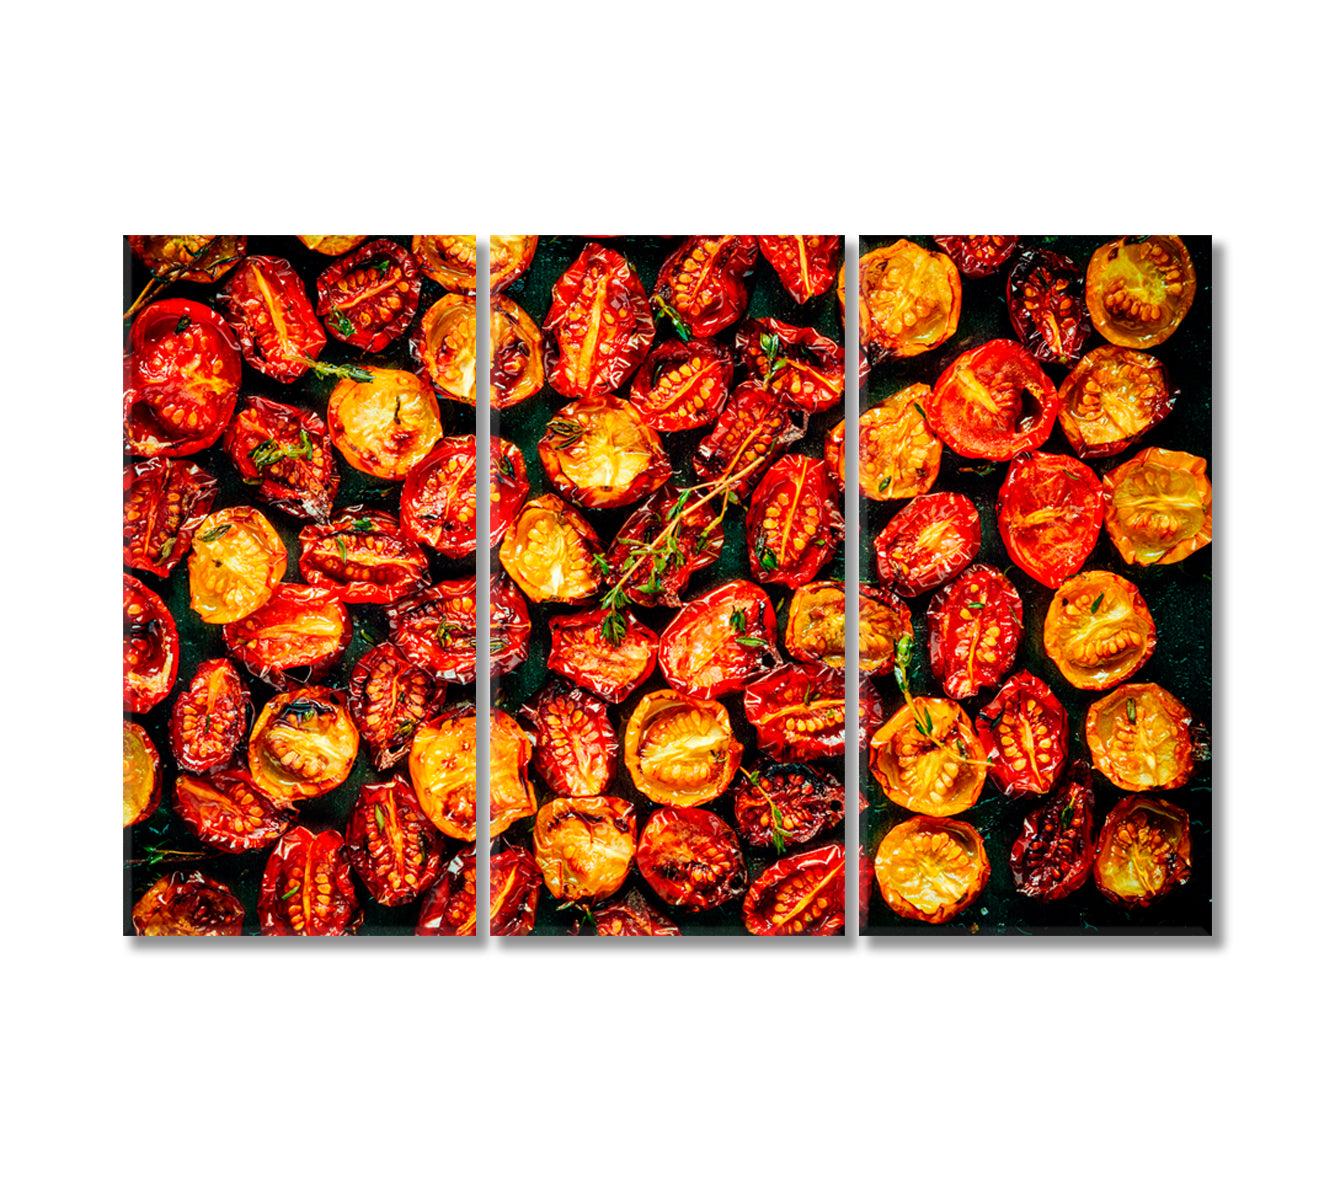 Roasted Red and Yellow Cherry Tomatoes Canvas Print-Canvas Print-CetArt-3 Panels-36x24 inches-CetArt